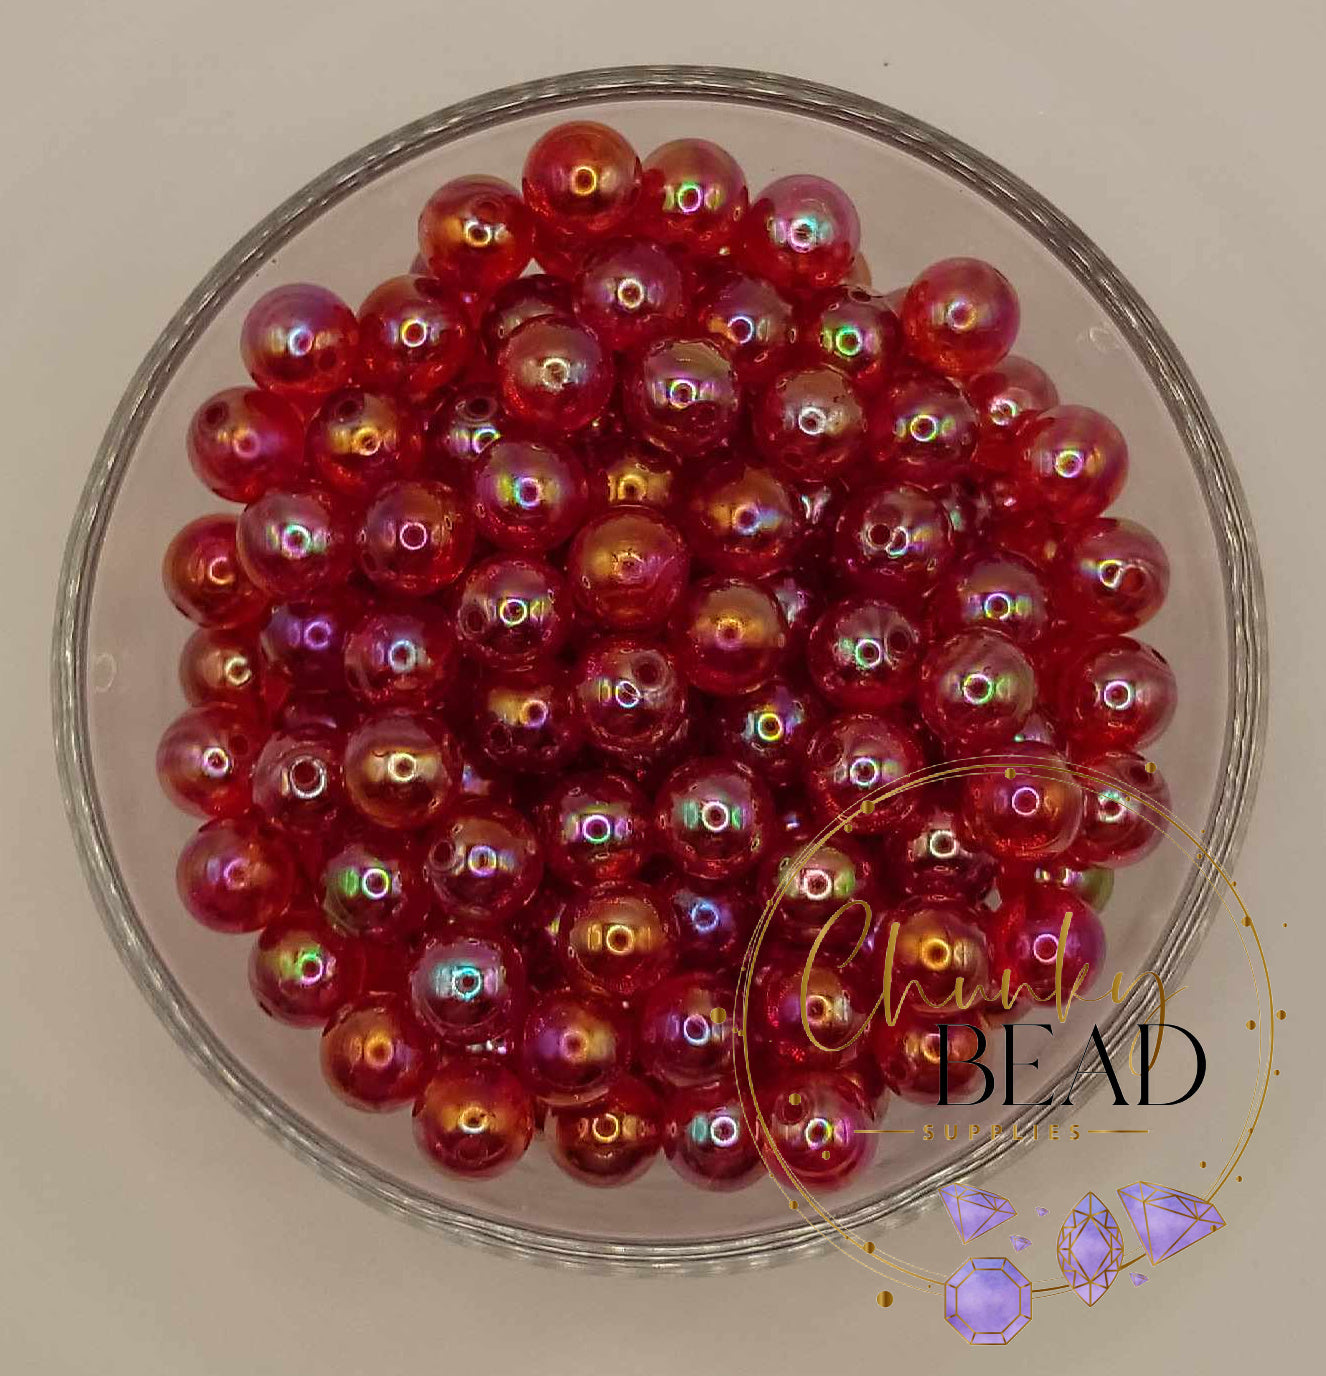 12mm “Red” Acrylic AB Jelly Solid Beads